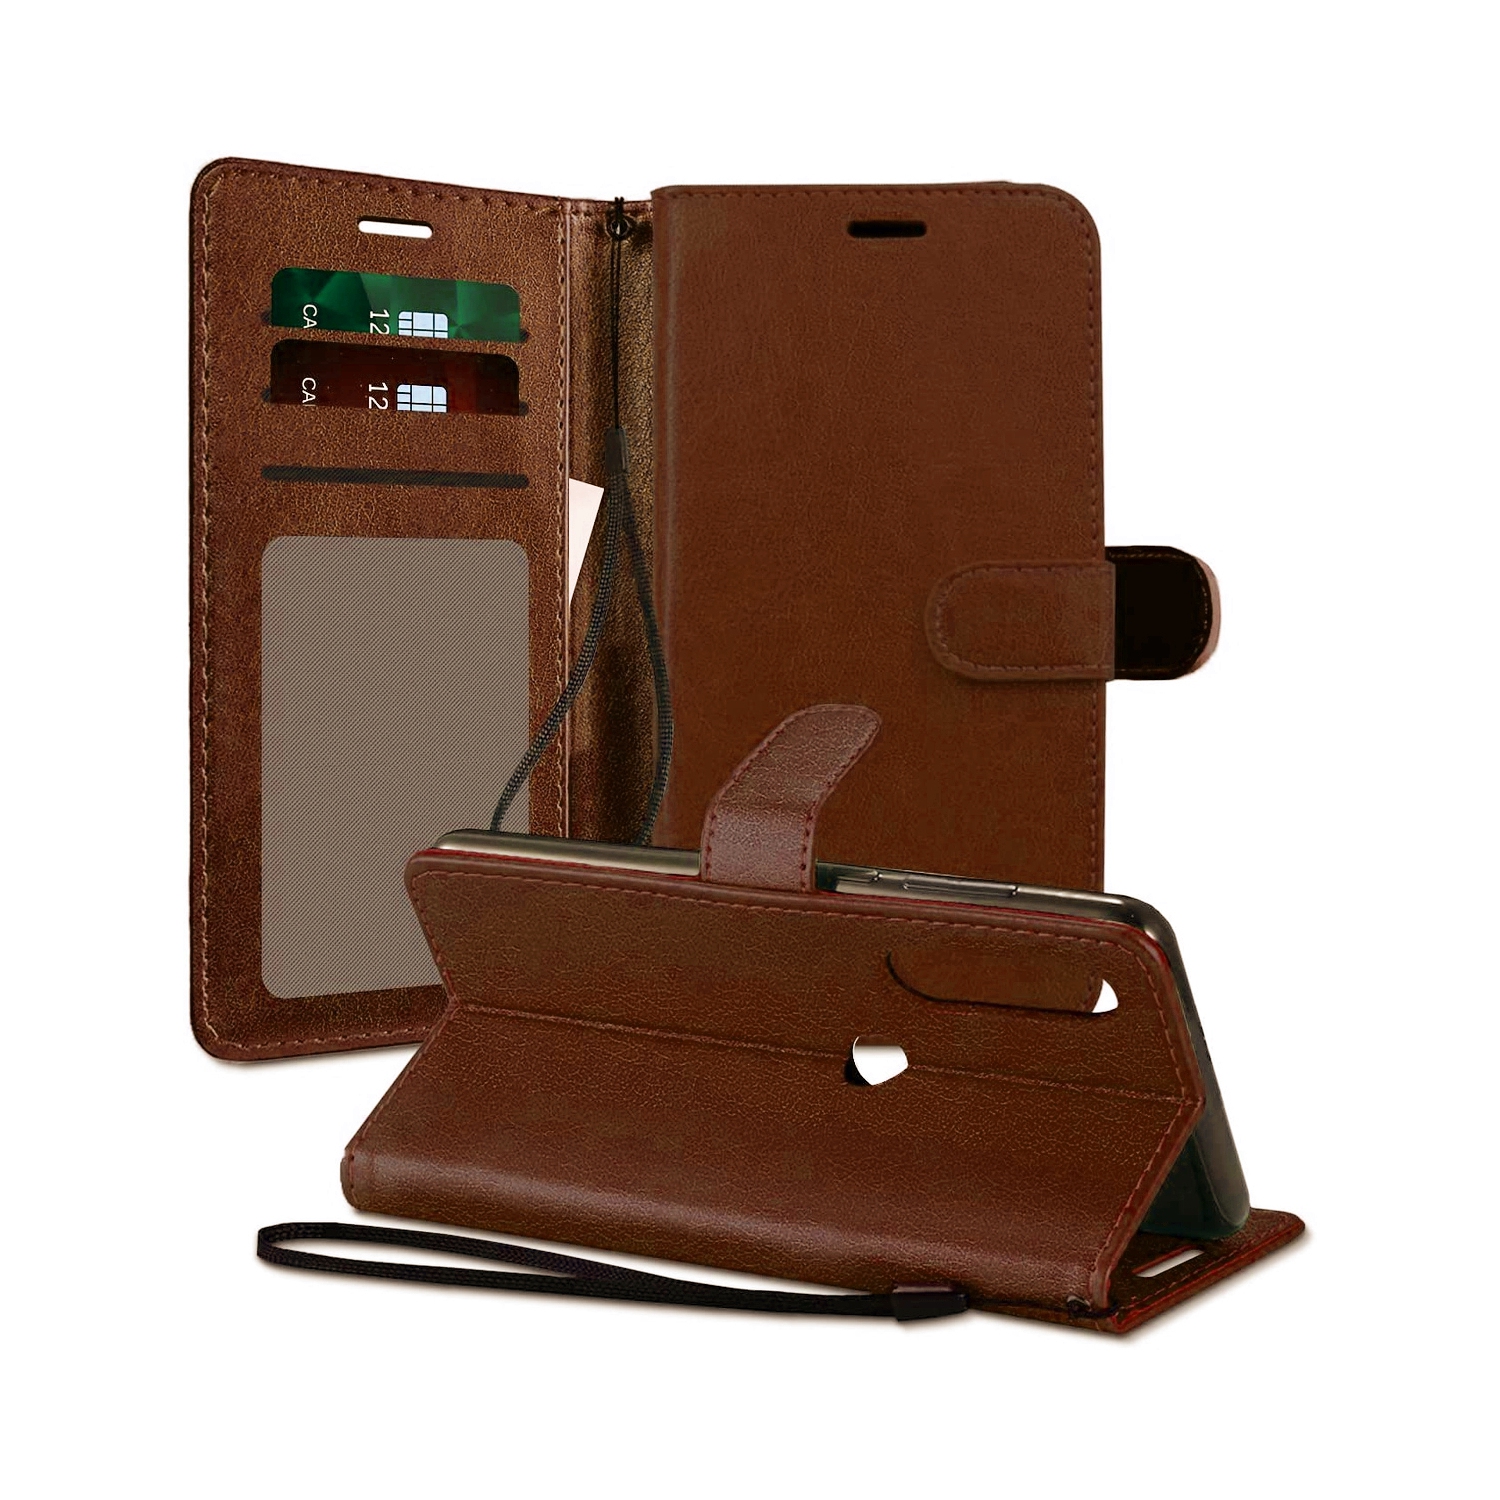 [CS] Motorola Moto G Power 2022 / G Play 2023 Case, Magnetic Leather Folio Wallet Flip Case Cover with Card Slot, Brown